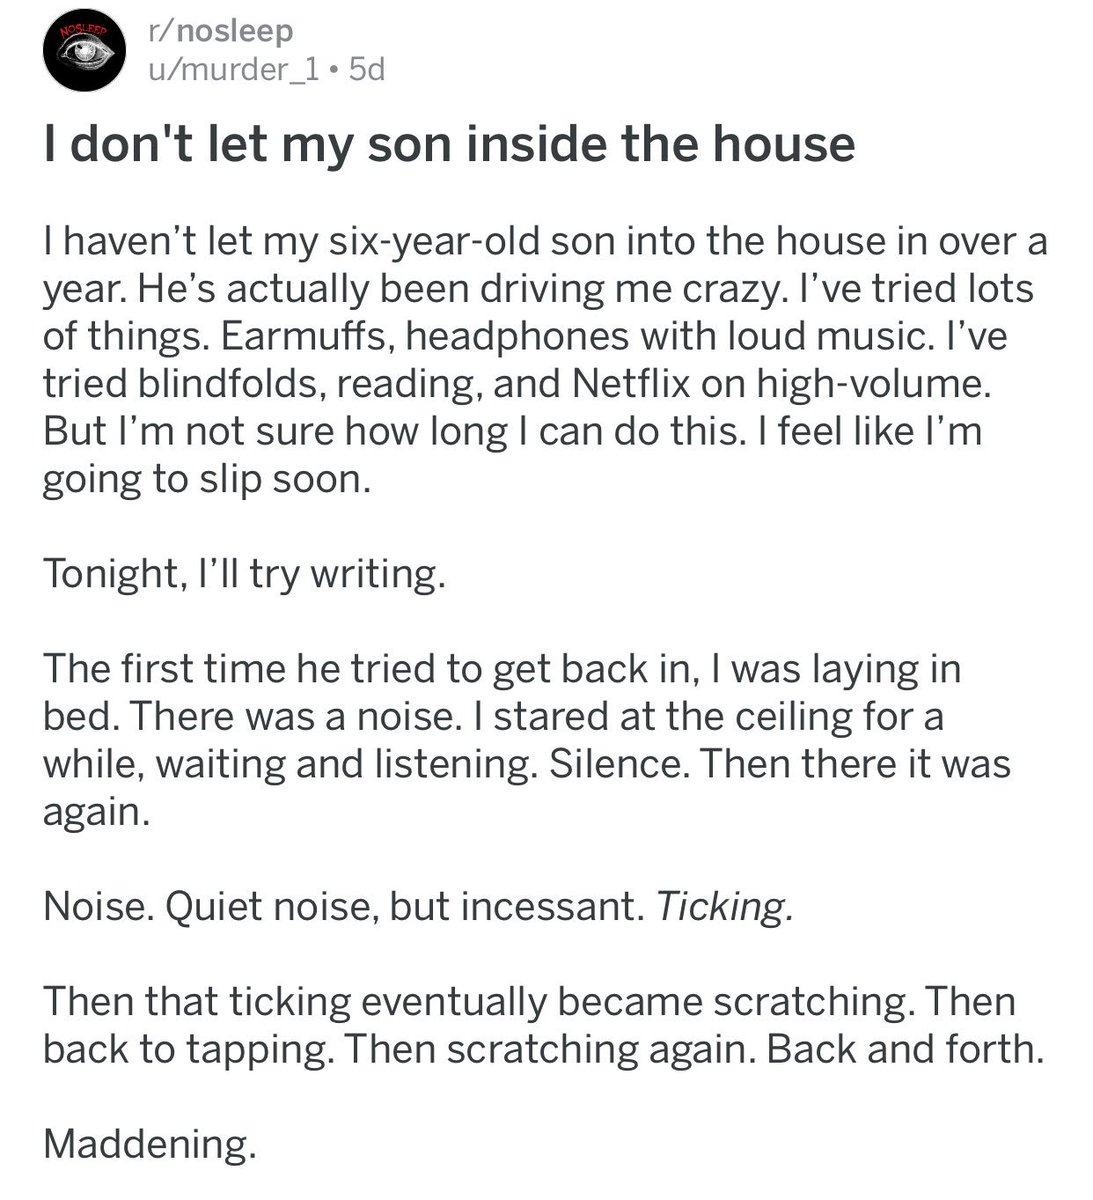 ↳ I don’t let my son inside the house { https://www.reddit.com/r/nosleep/comments/93of94/i_dont_let_my_son_inside_the_house/}